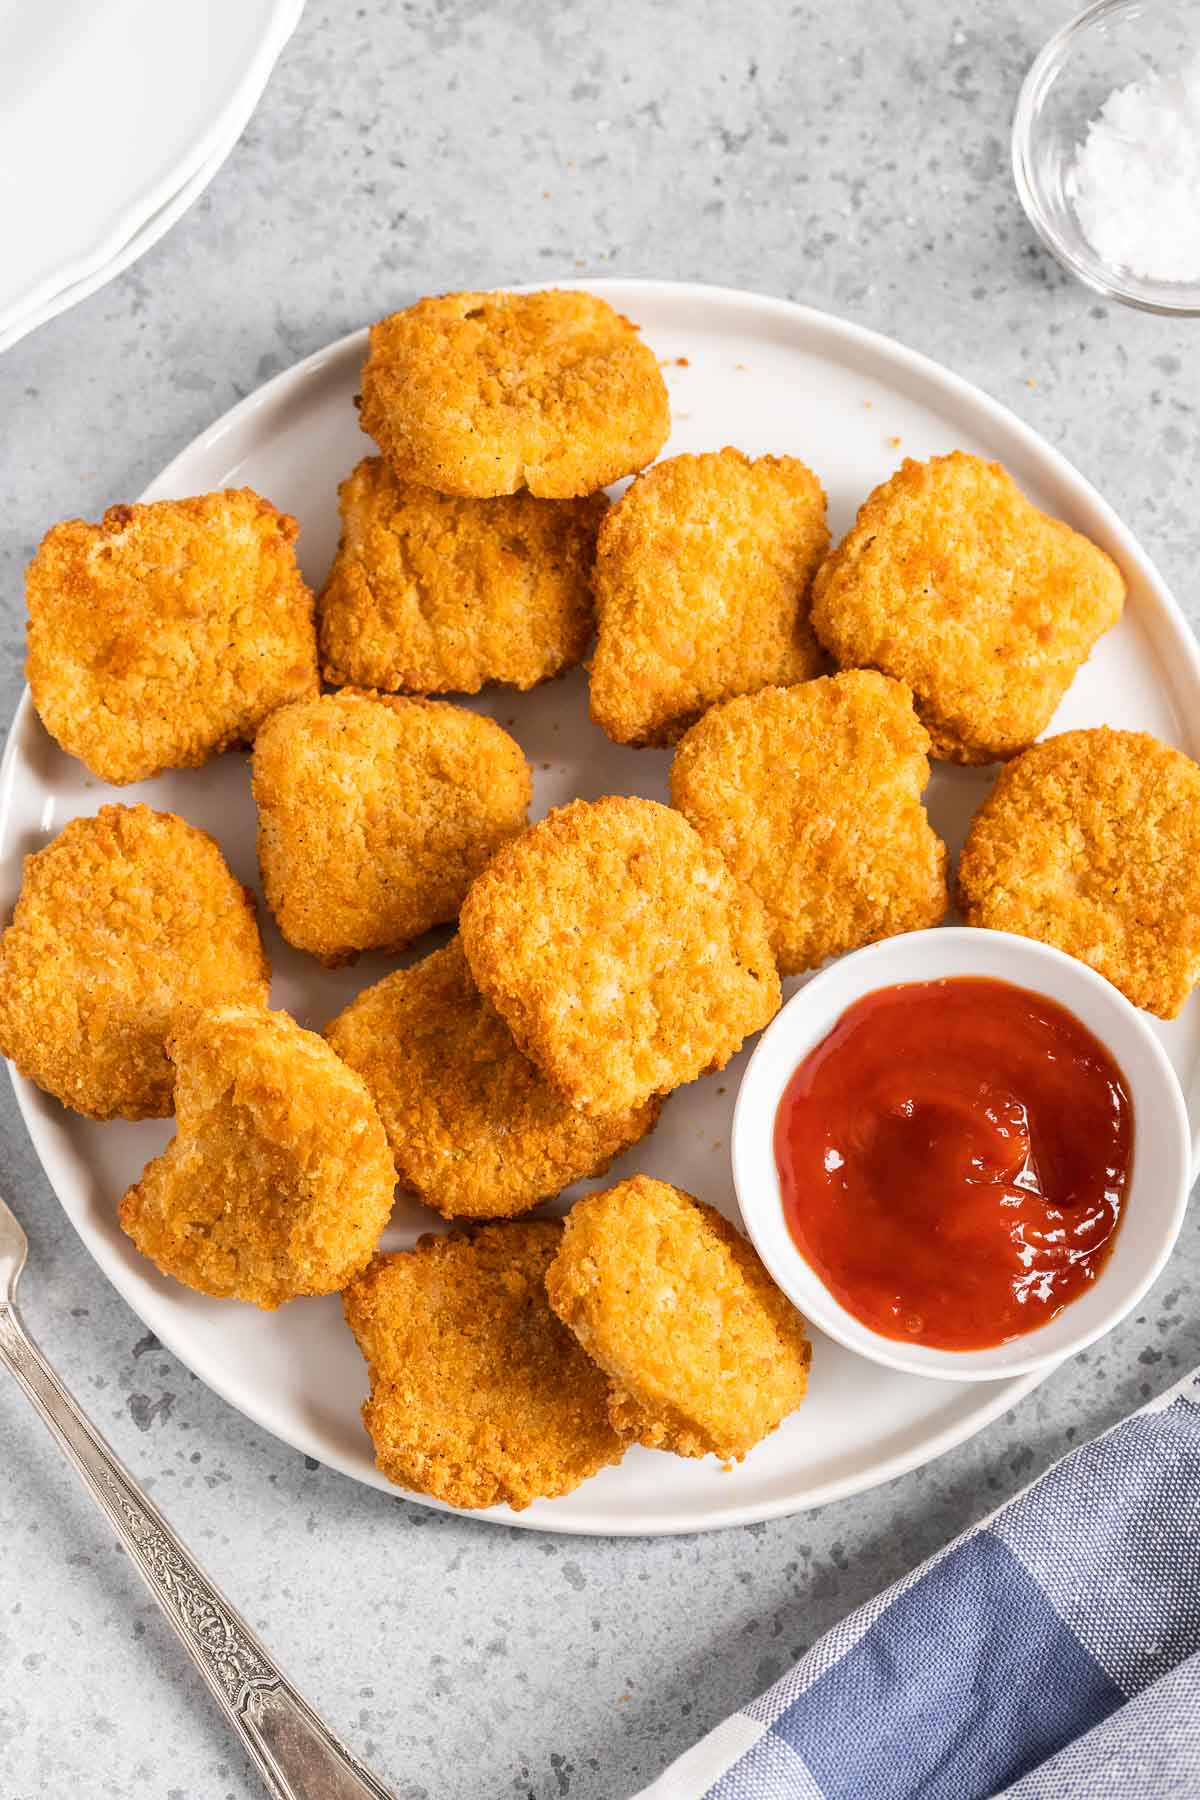 Chicken nuggets on a white plate with a small bowl of ketchup.